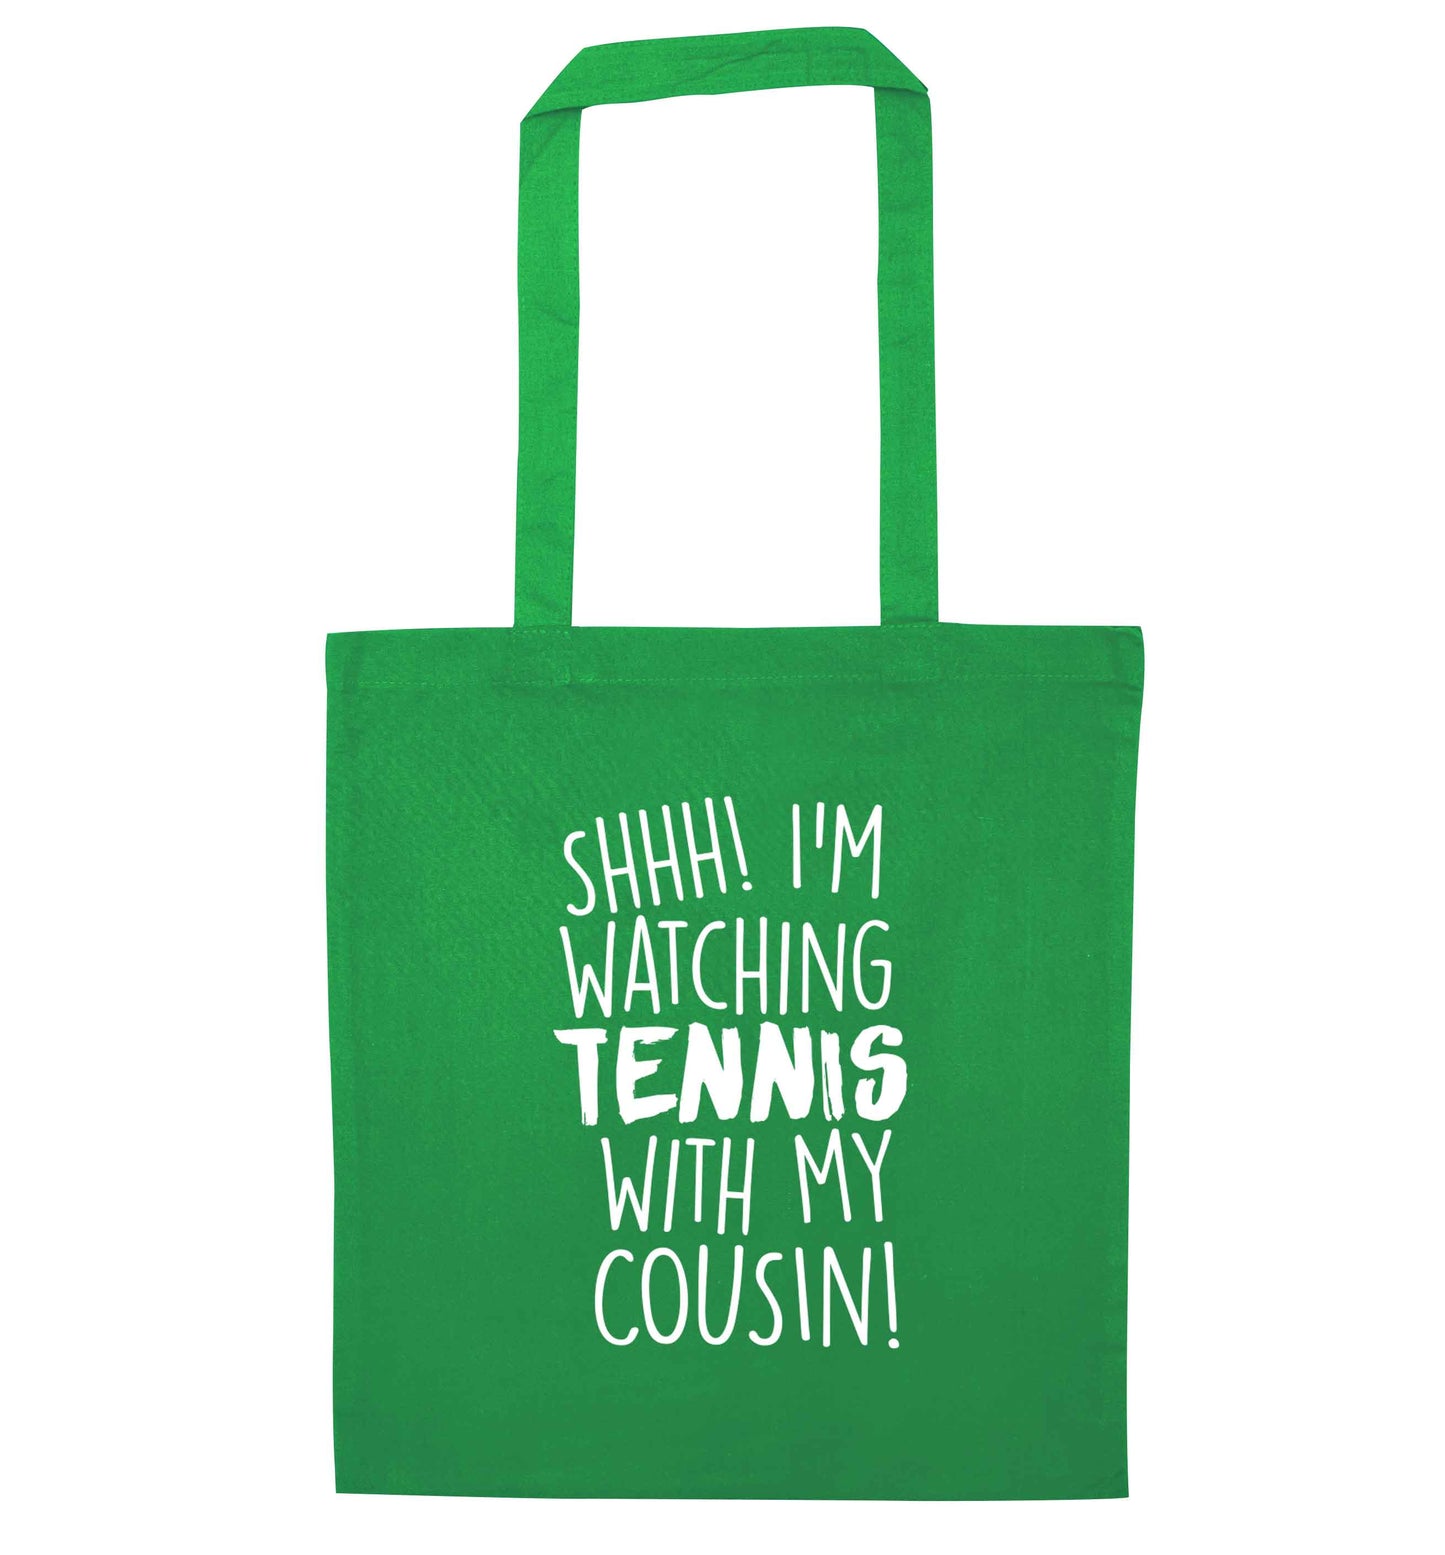 Shh! I'm watching tennis with my cousin! green tote bag